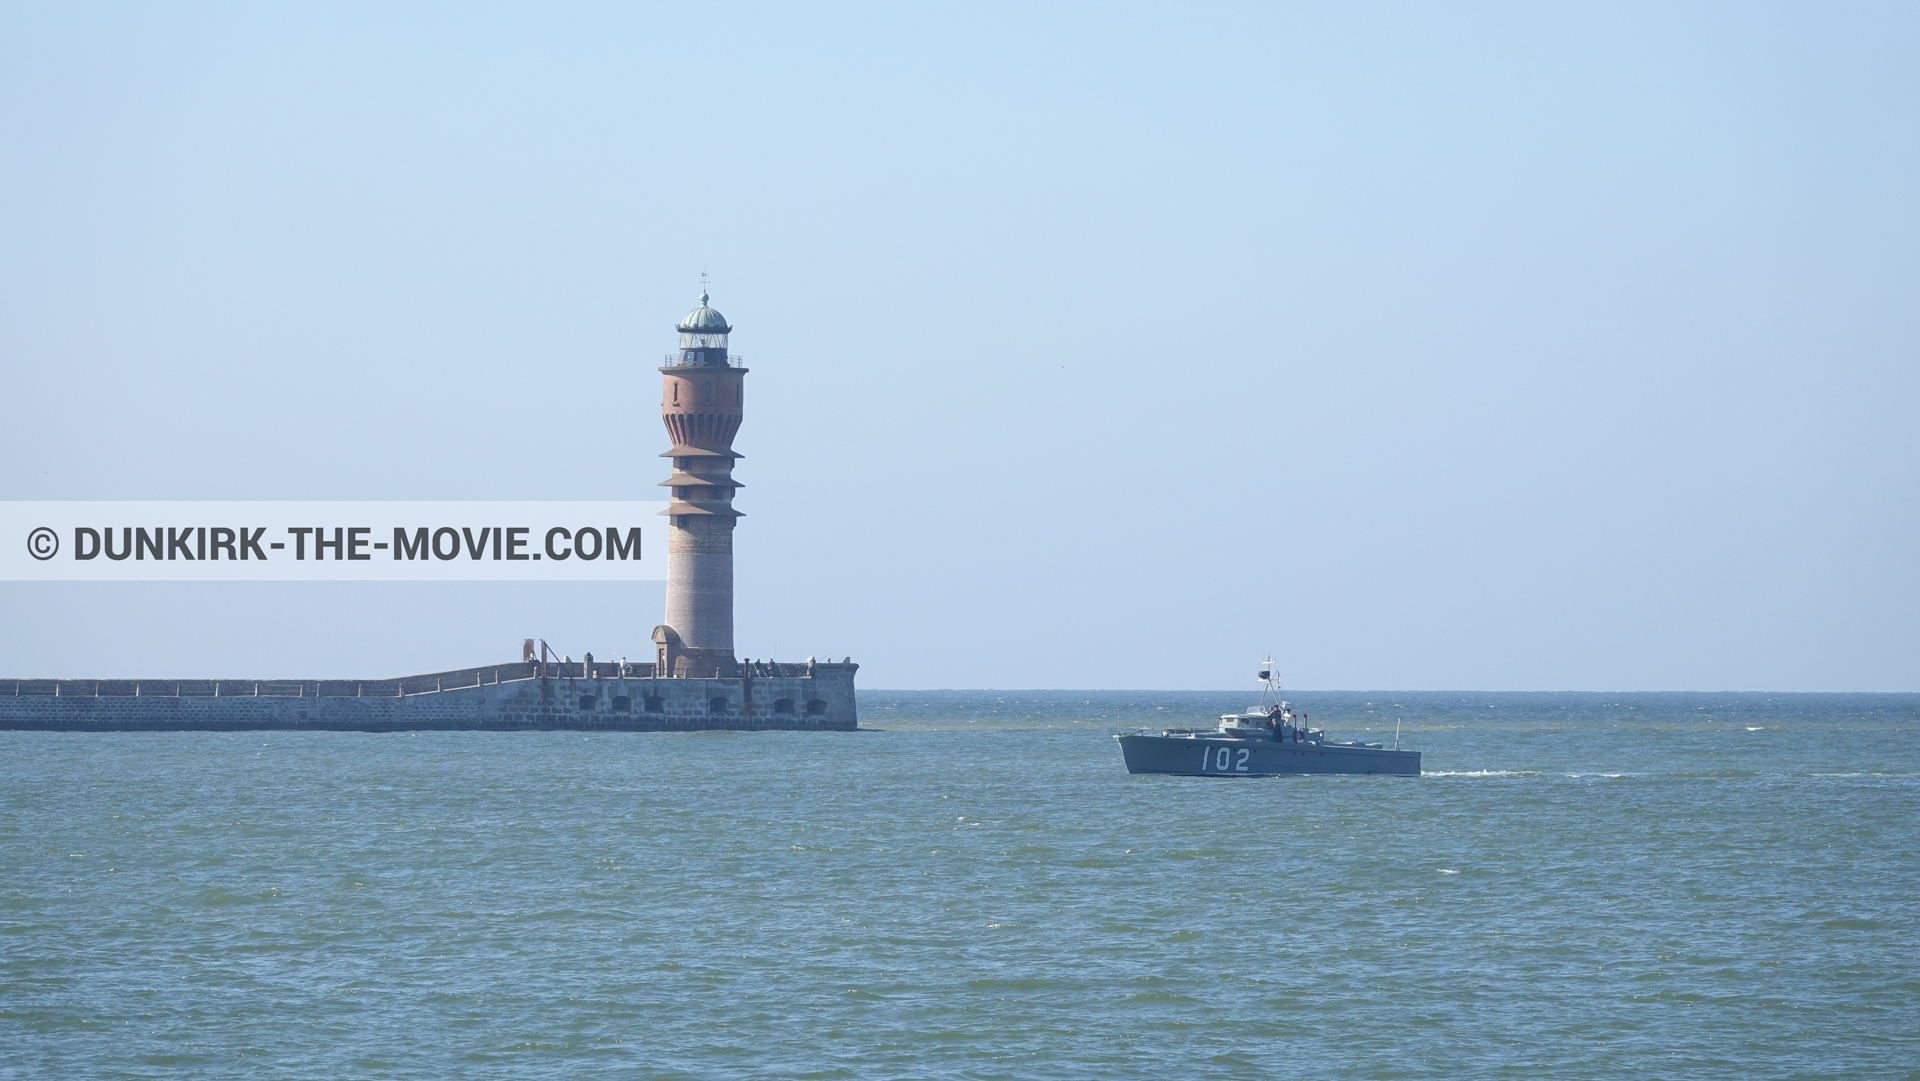 Picture with boat, blue sky, calm sea, St Pol sur Mer lighthouse,  from behind the scene of the Dunkirk movie by Nolan